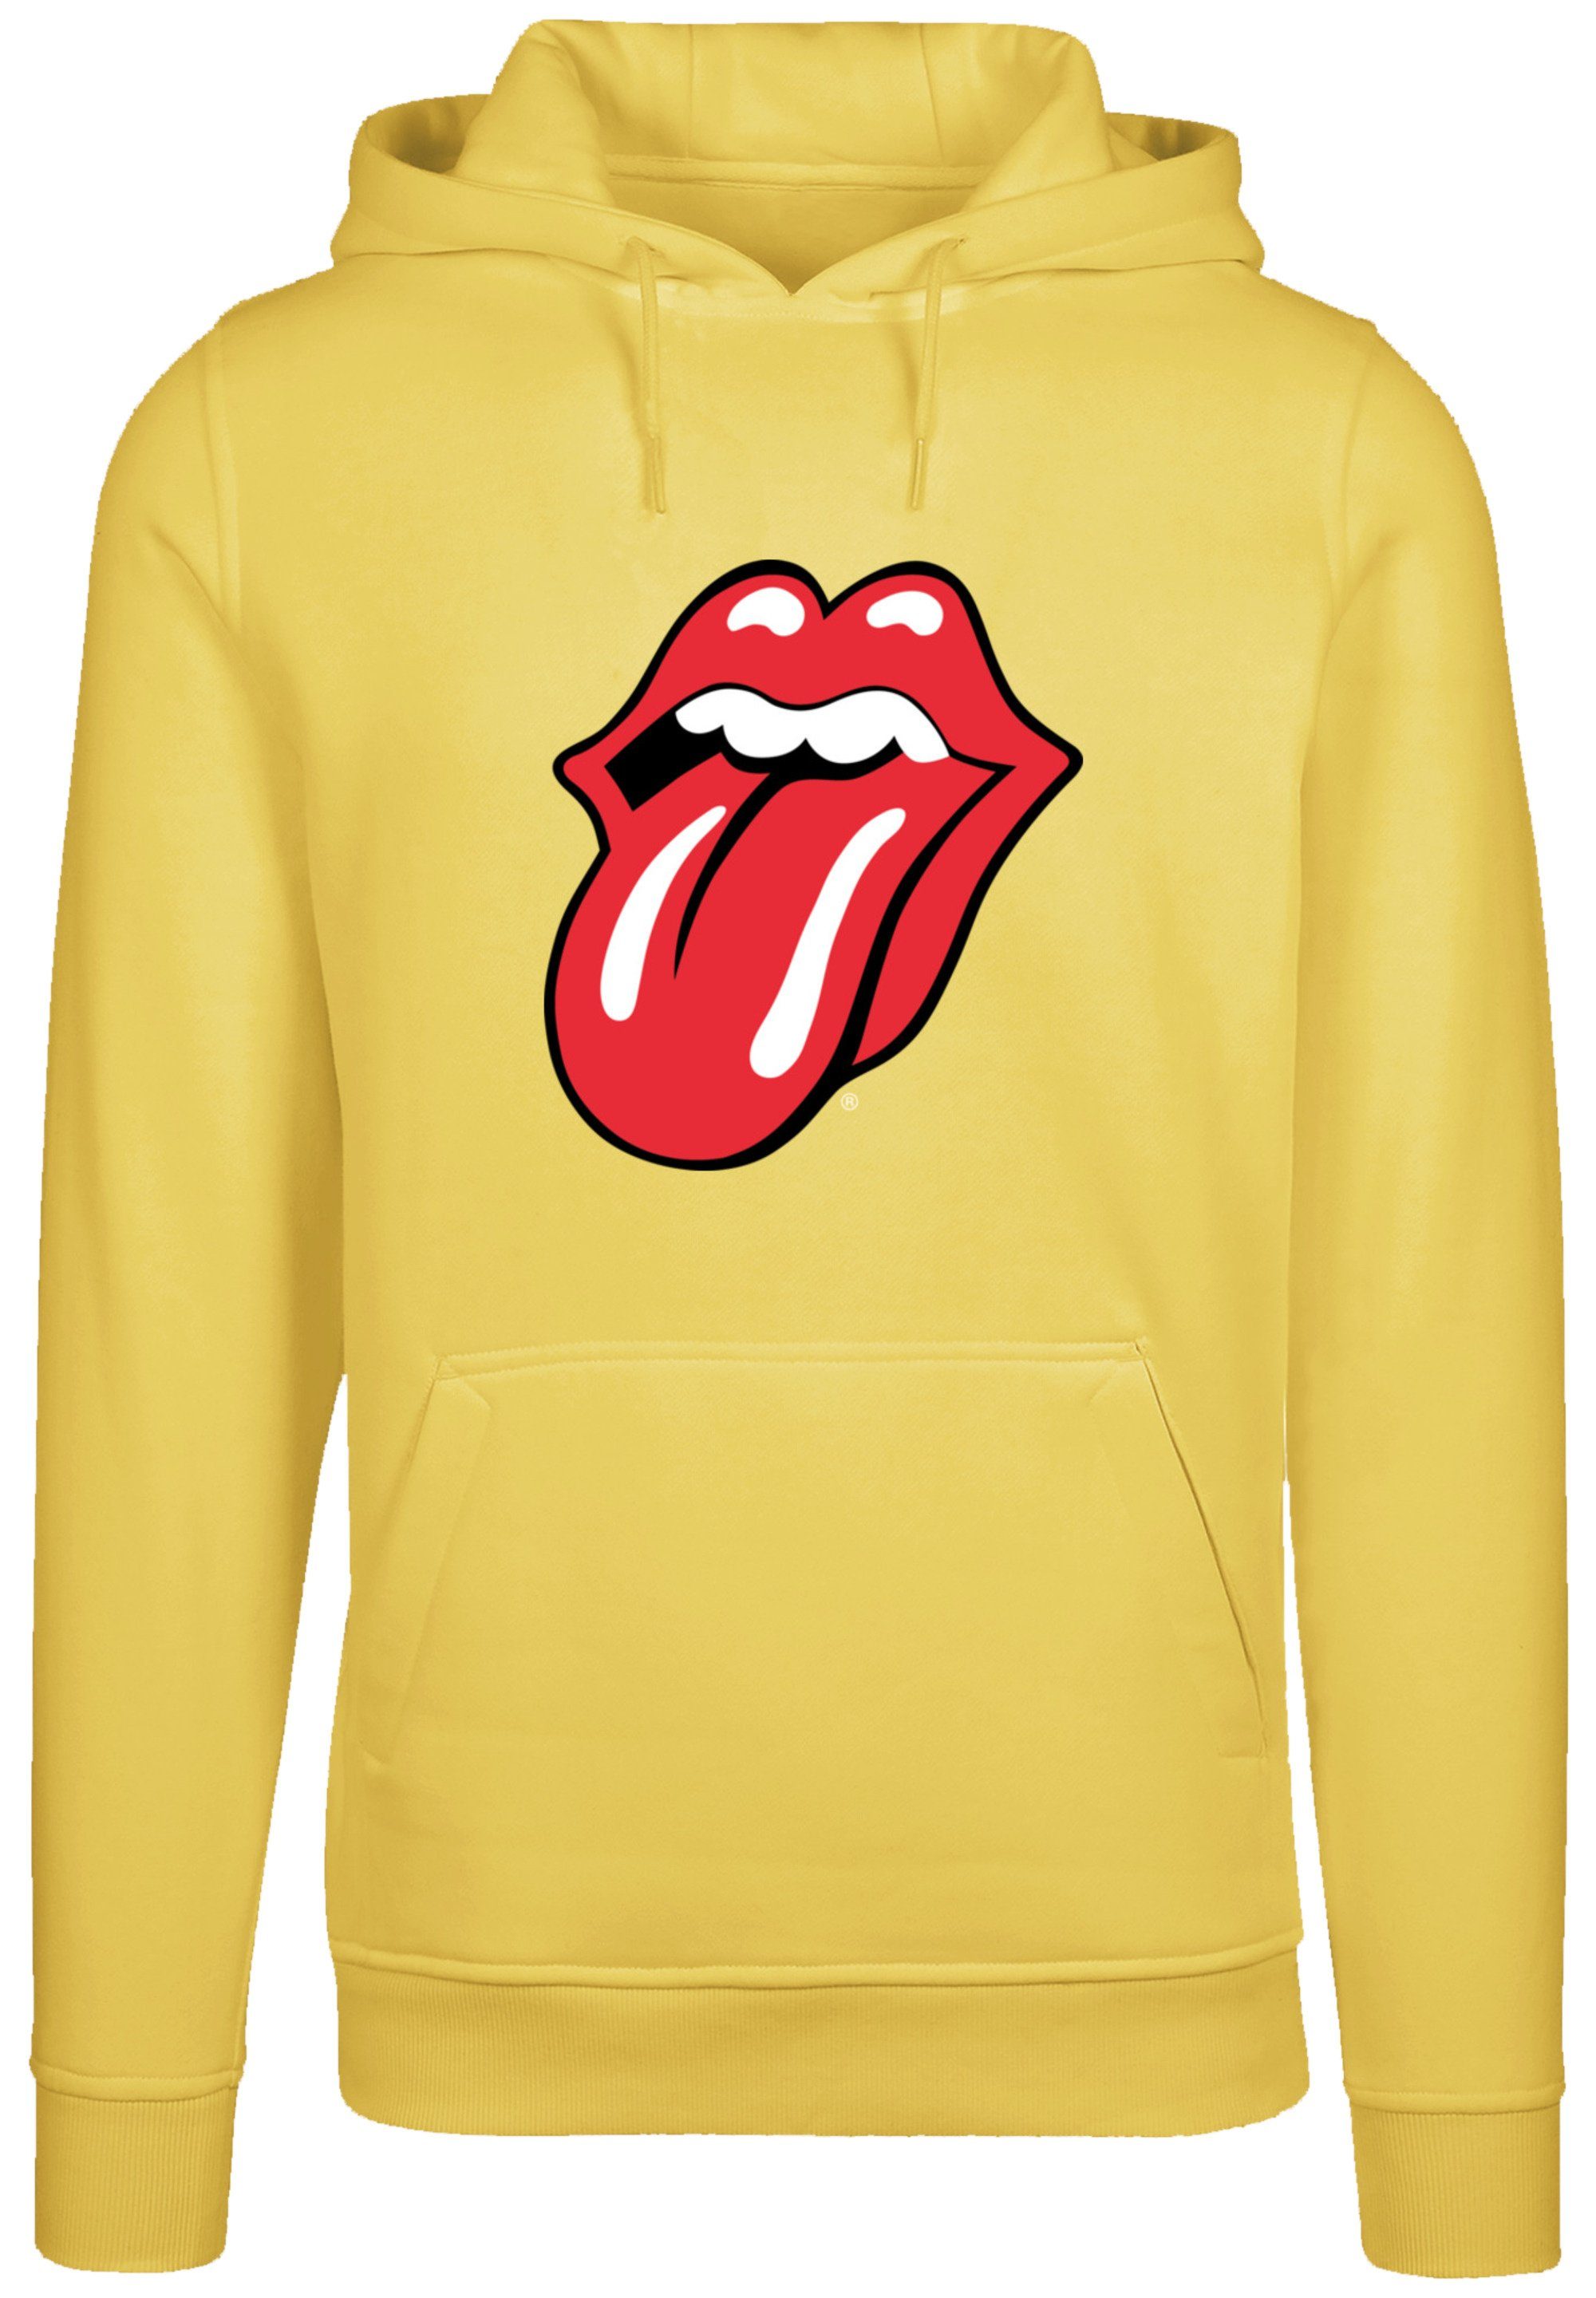 F4NT4STIC Kapuzenpullover The Rolling Band taxi Warm, Musik Hoodie, Stones Classic Rock Bequem Zunge yellow